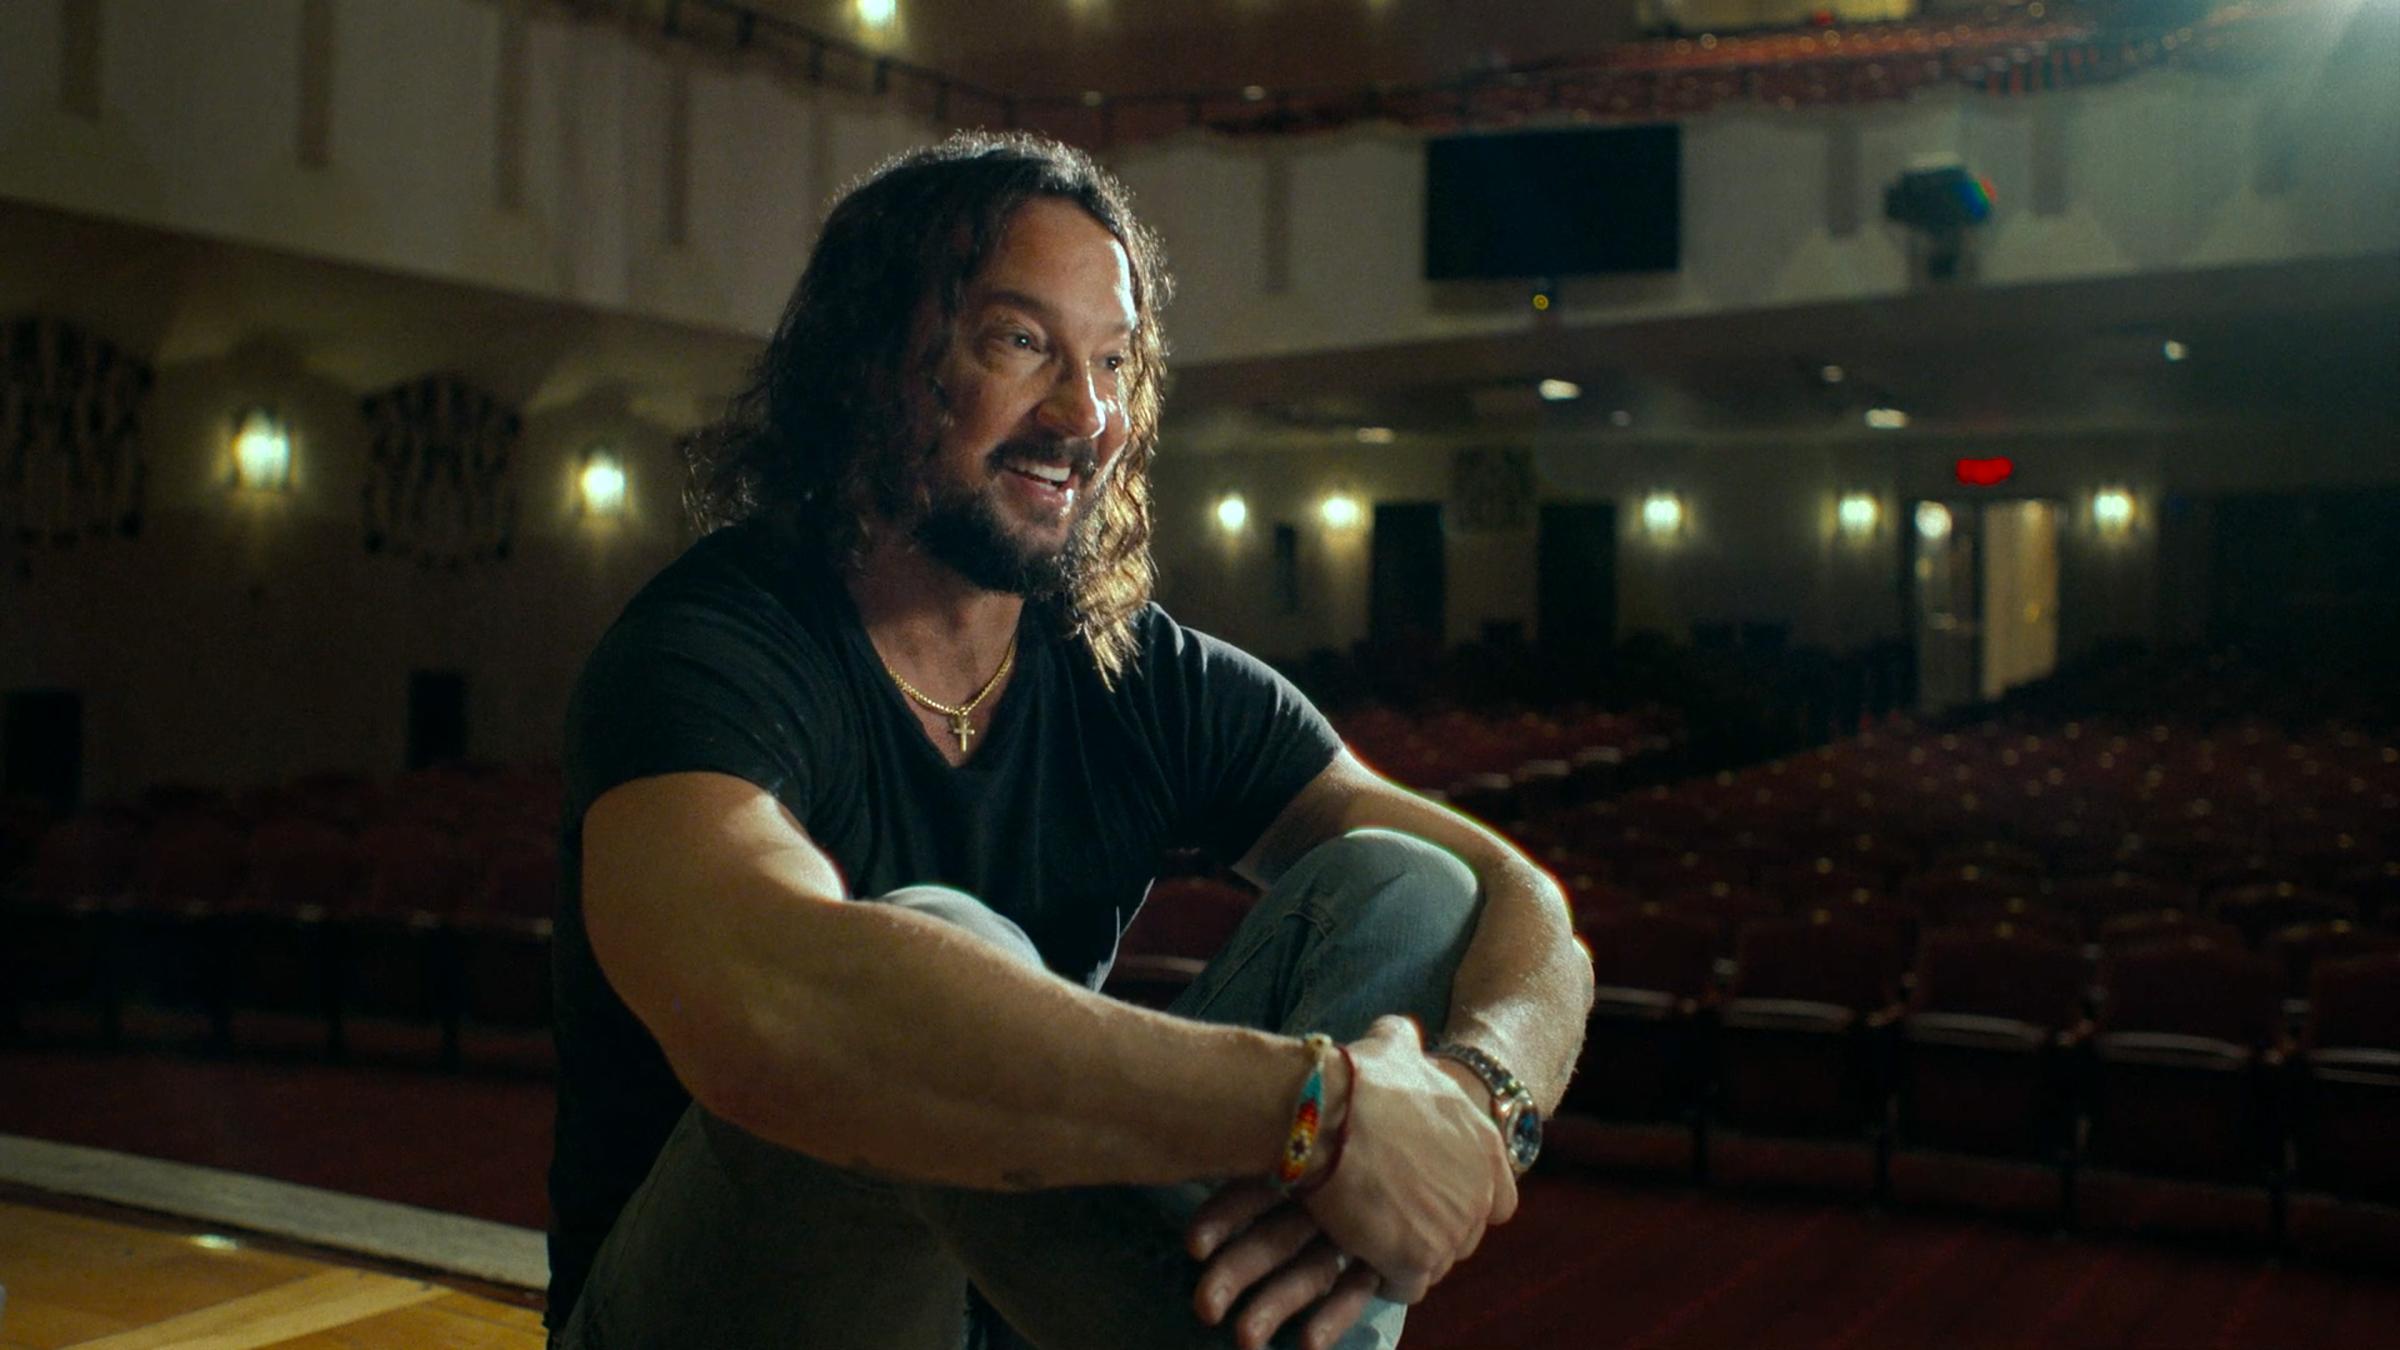 THE SECRETS OF HILLSONG “The Prodigal Son” — Season 1, Episode 2 (airs Friday, May 19th) — Pictured: Carl Lentz. CR: FX.